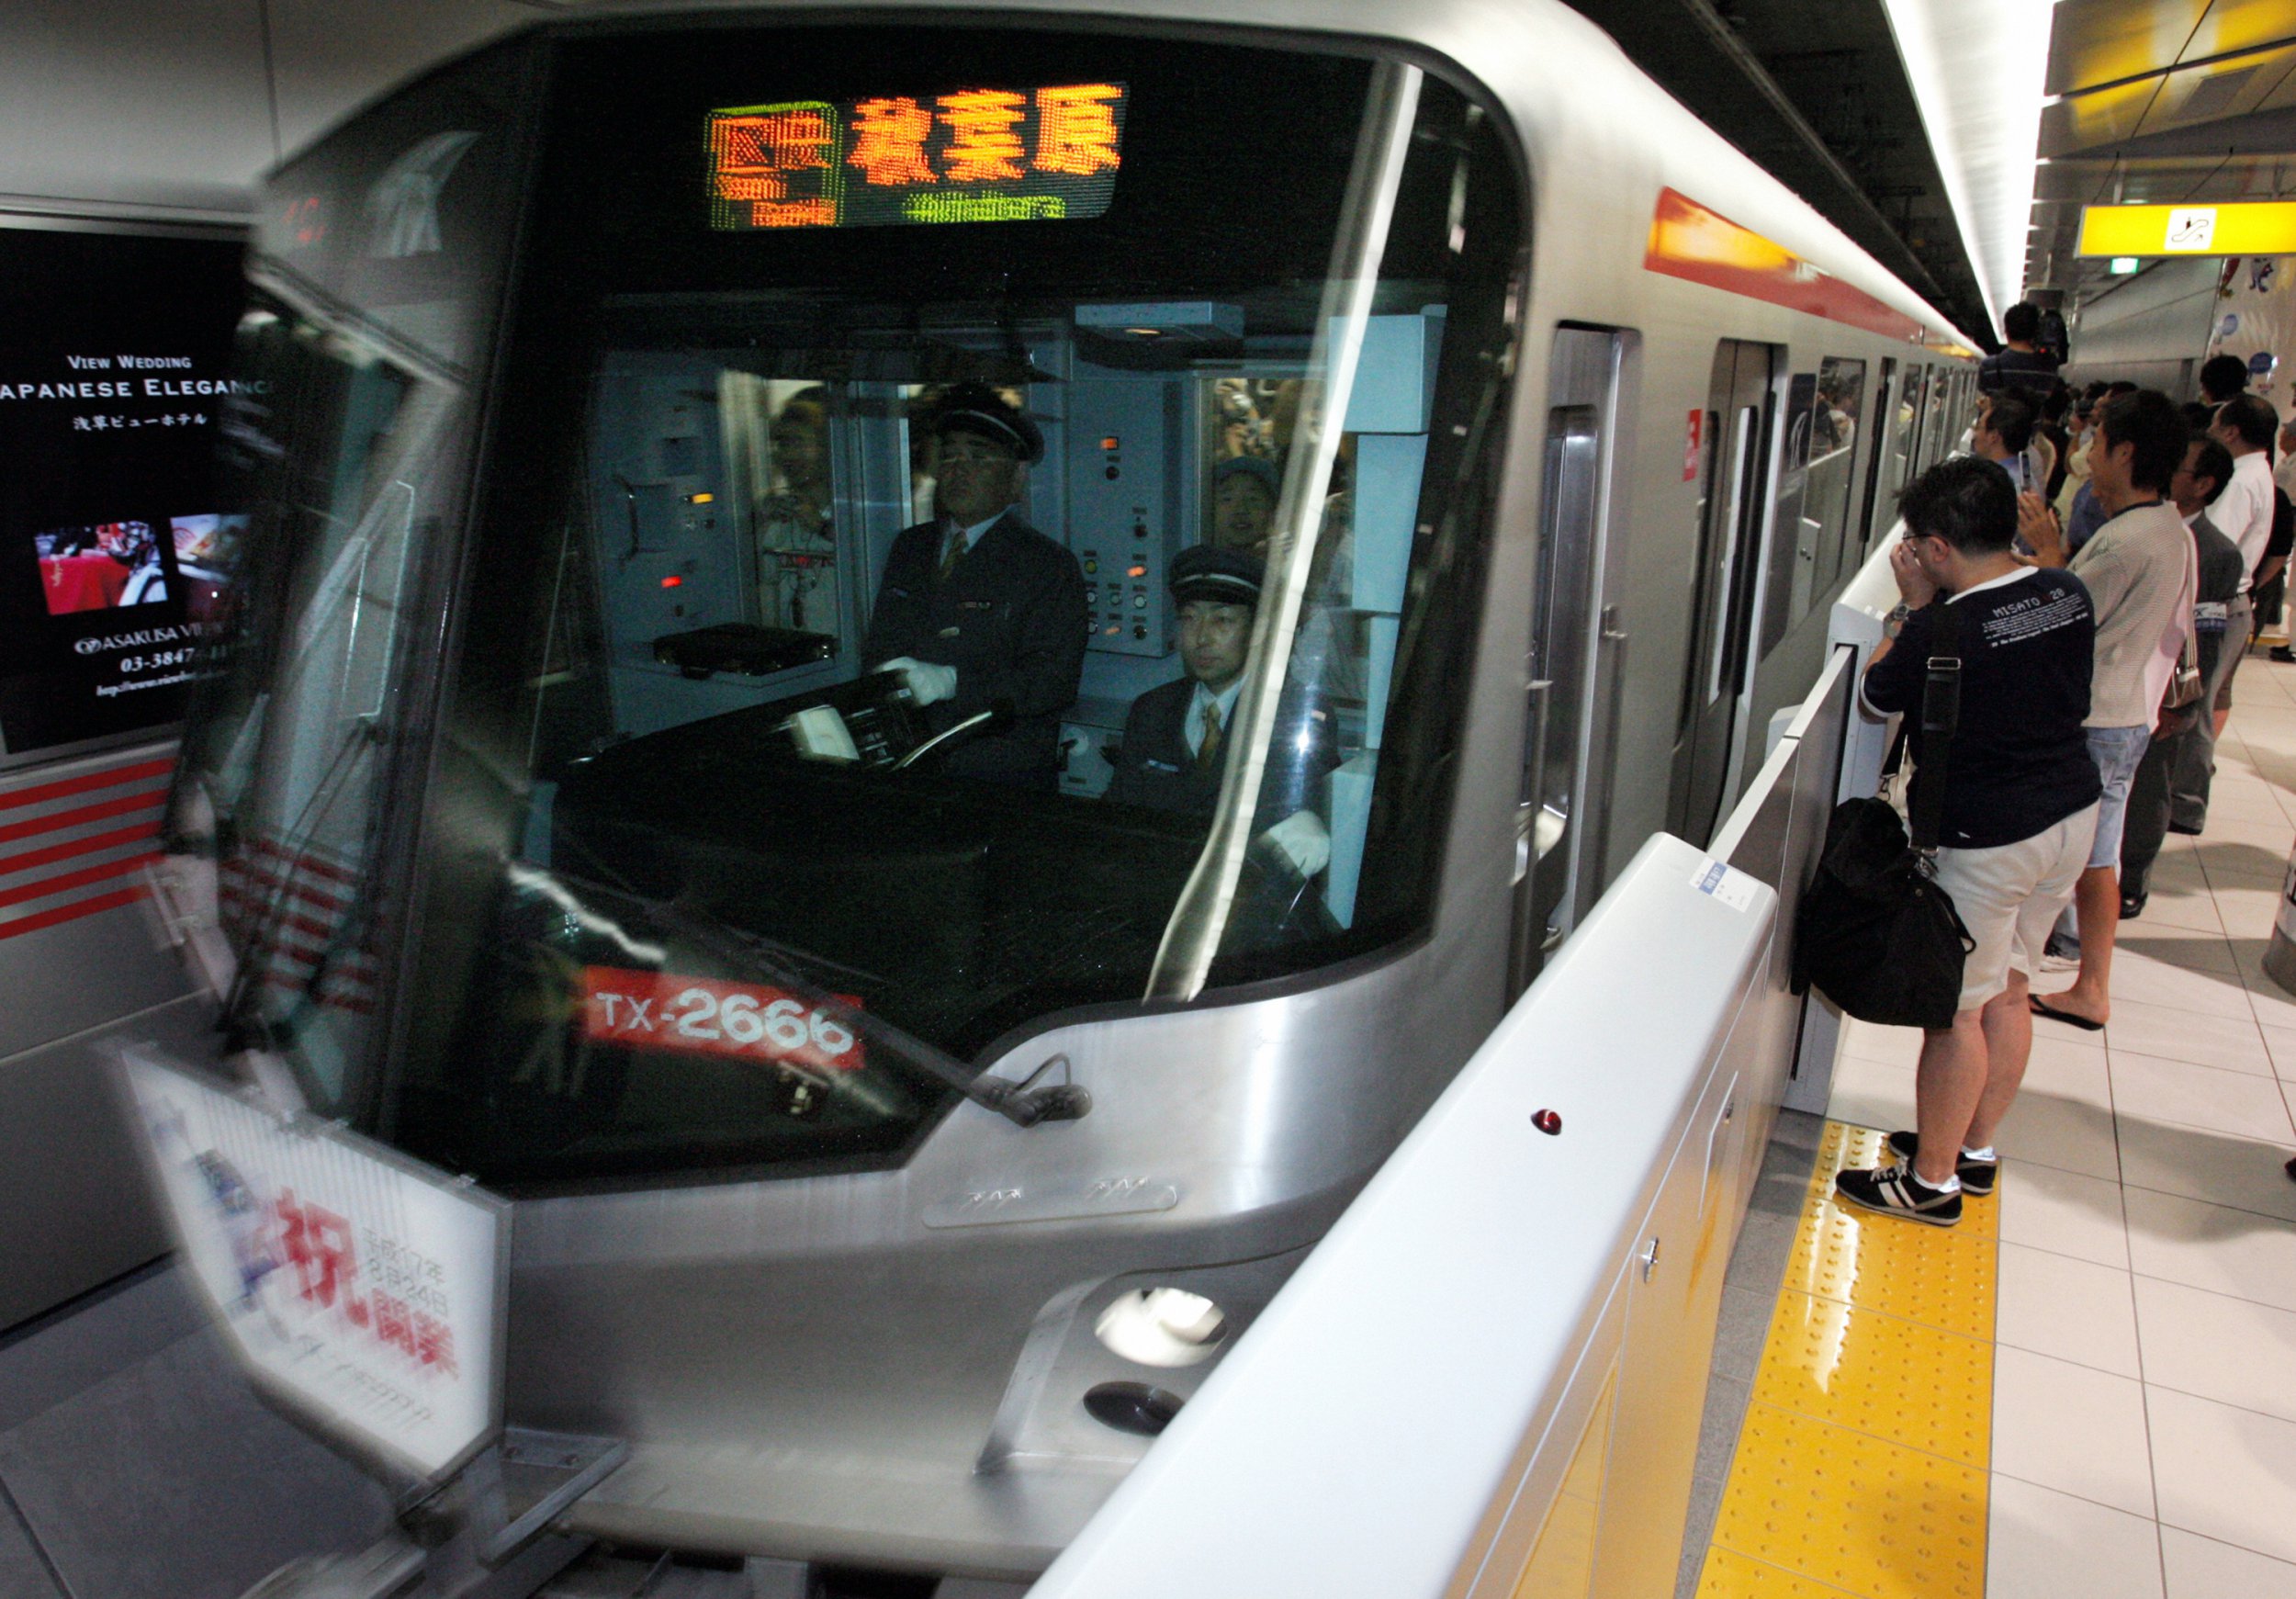 Japan Railway expresses their “deep apologies” after train leaves 20 seconds early